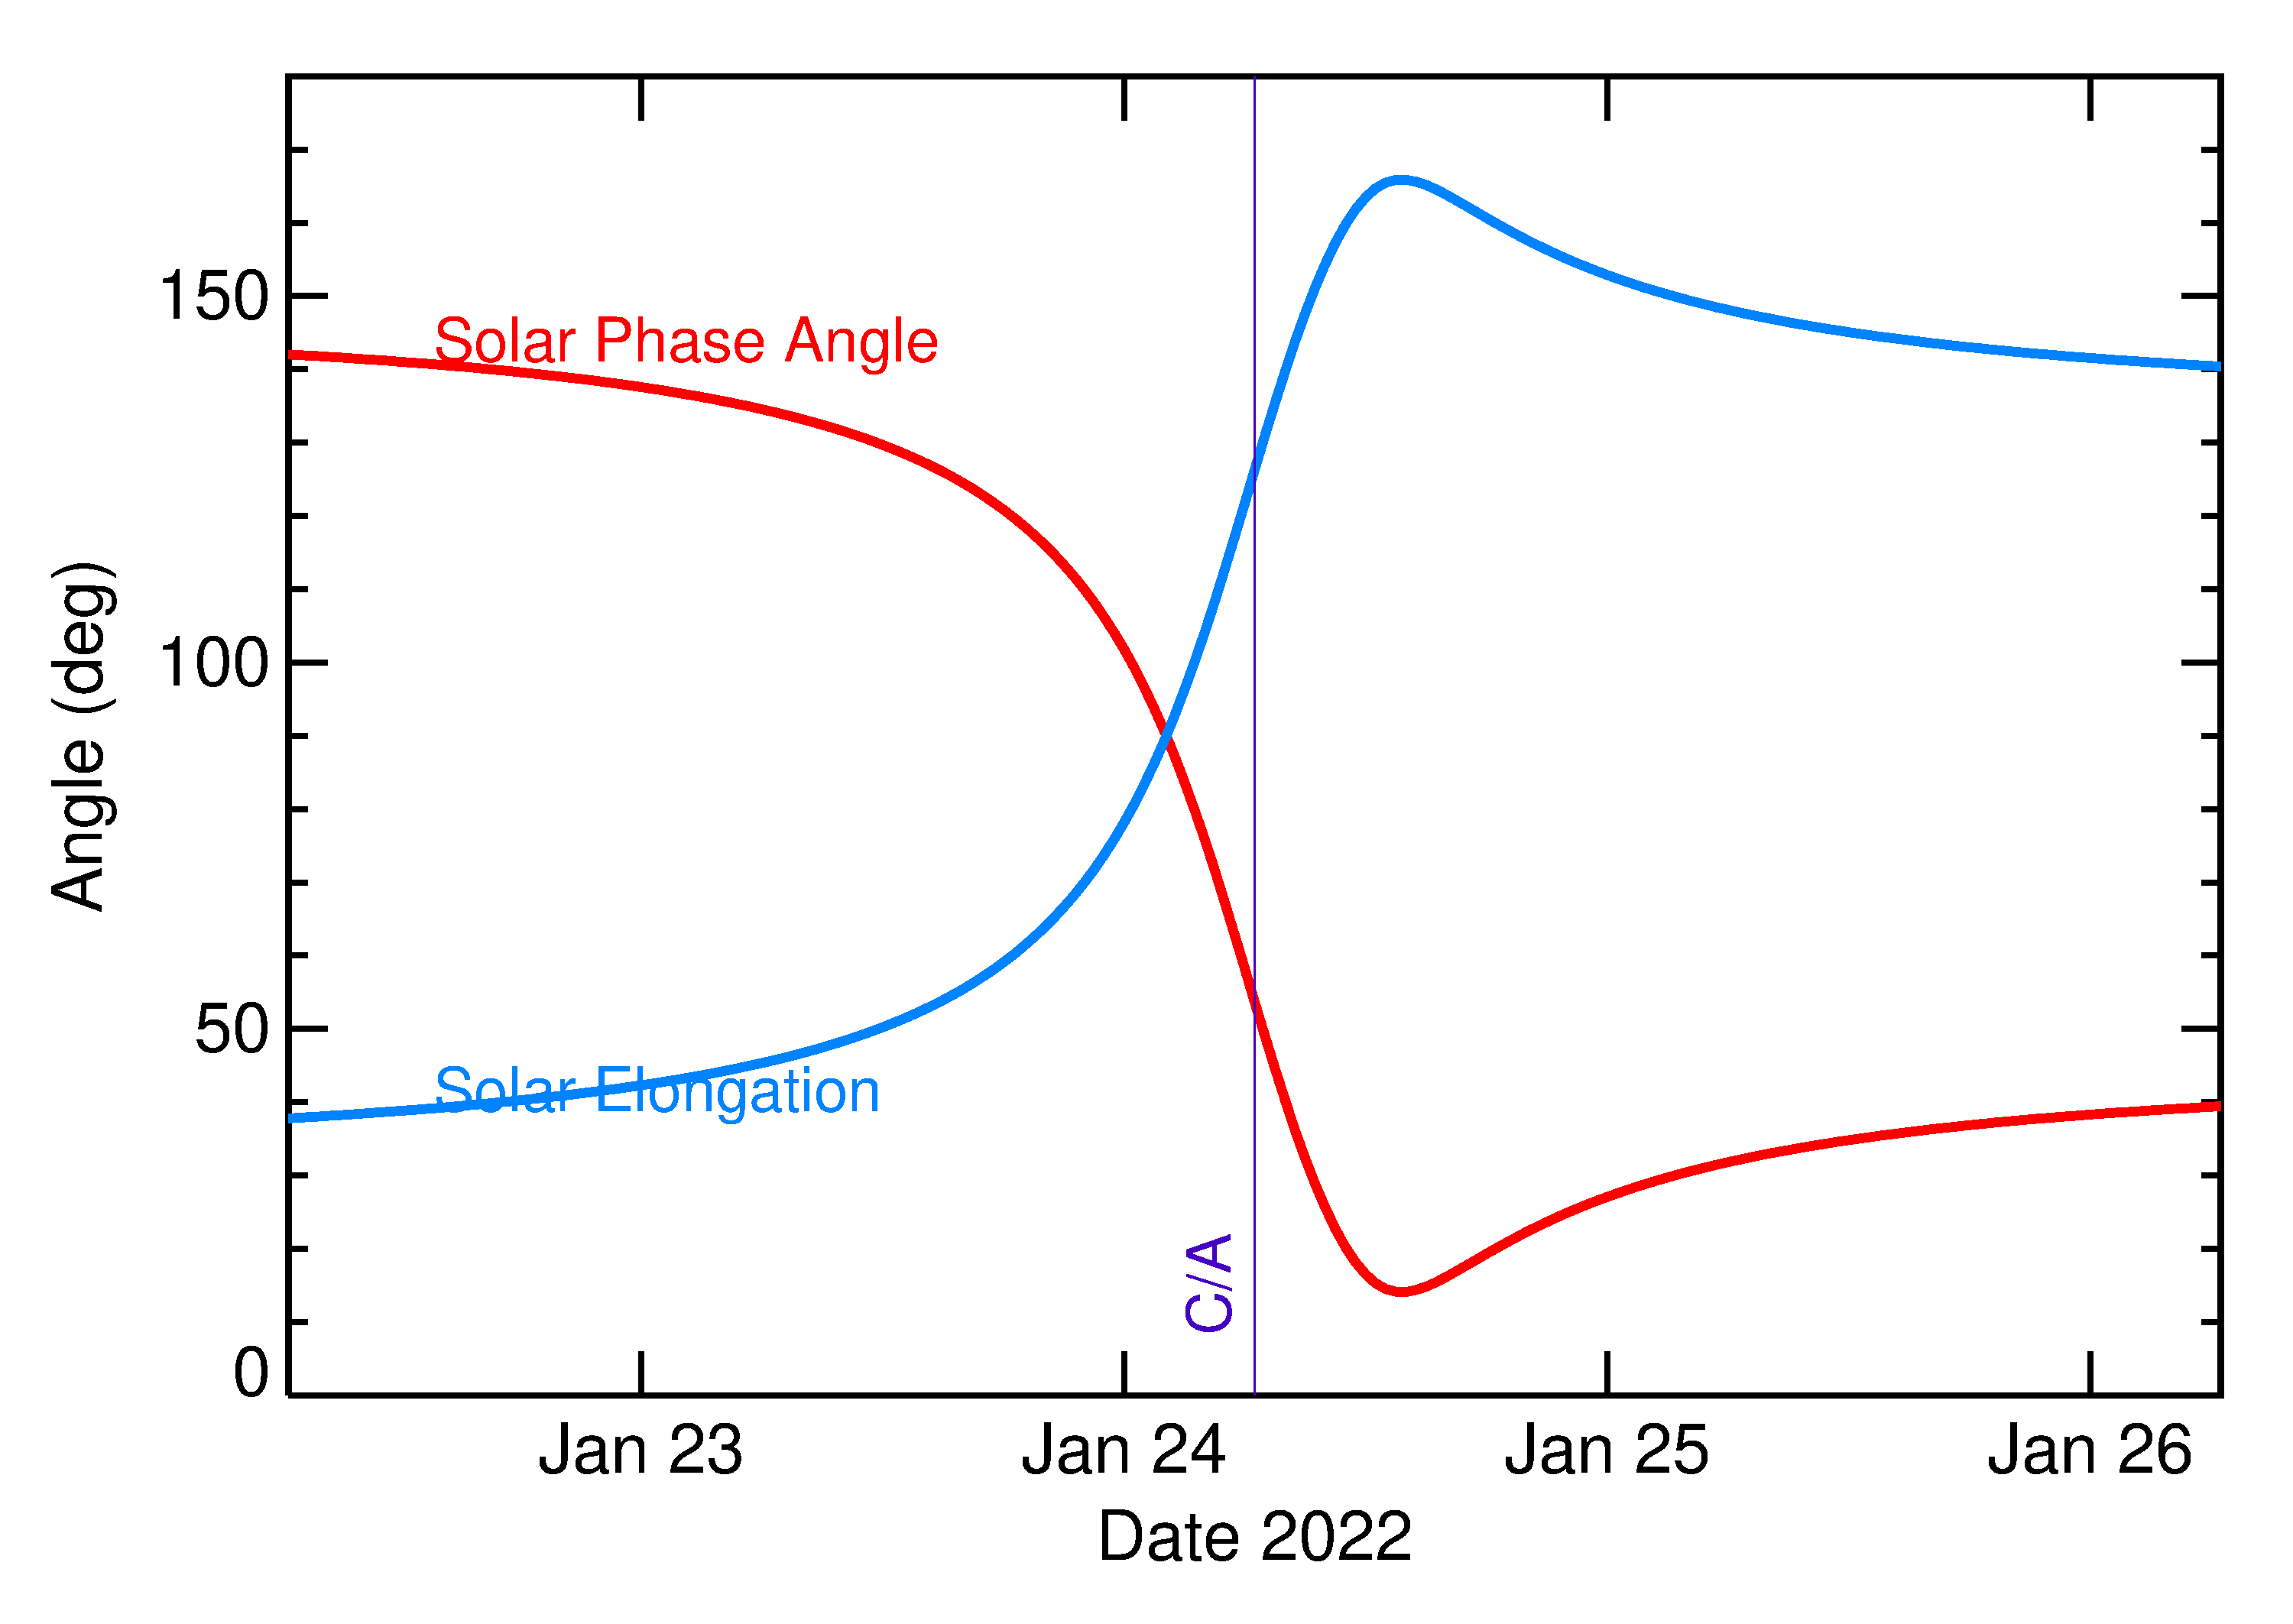 Solar Elongation and Solar Phase Angle of 2022 BT in the days around closest approach